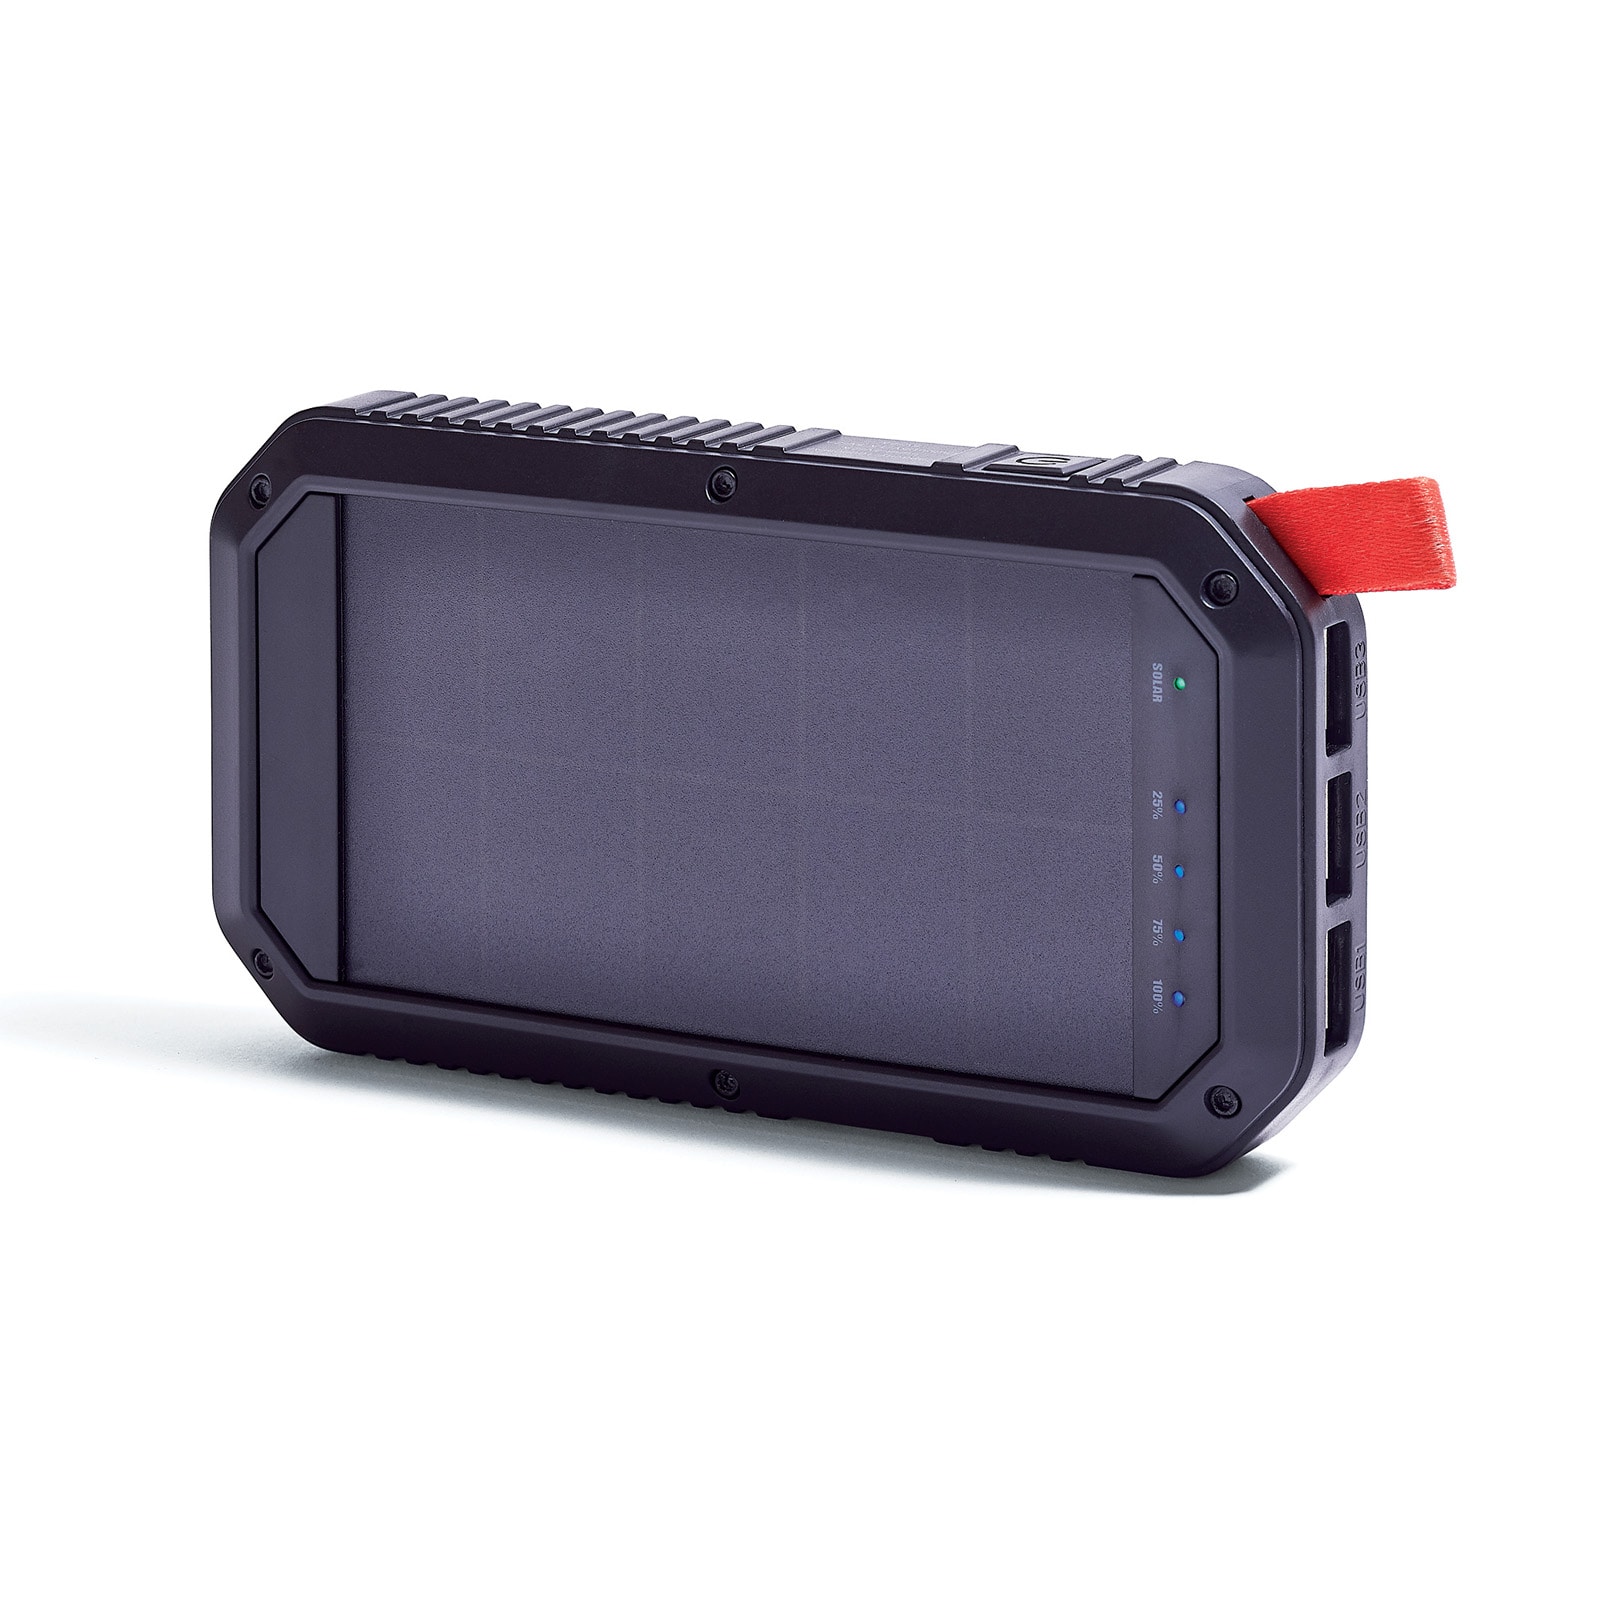 Chargeur solaire lumineux 10 000mAh